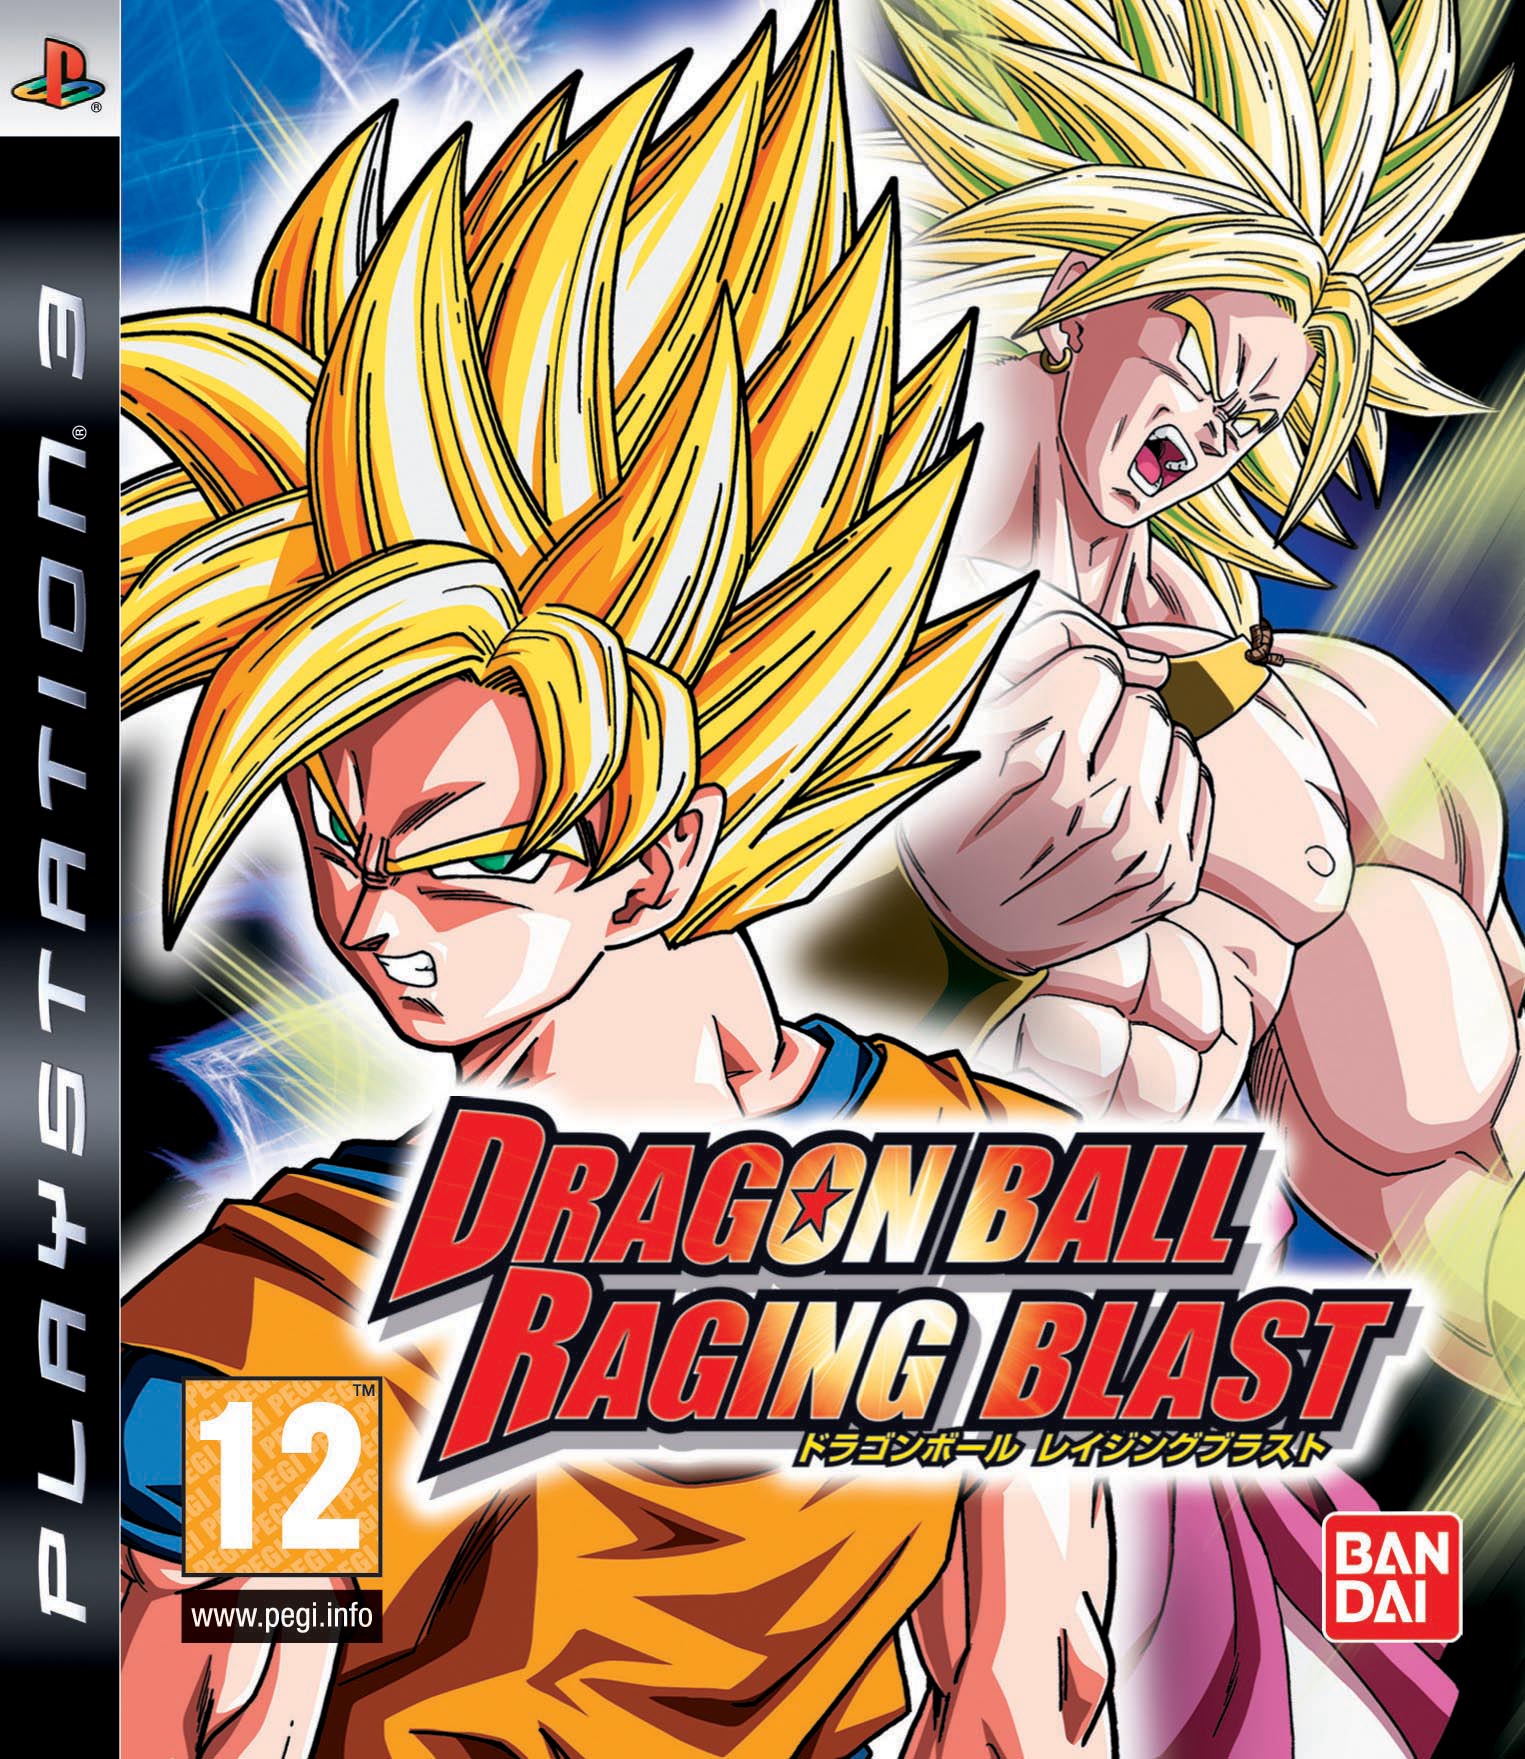 Dragon Ball Z Games For Ps3 List